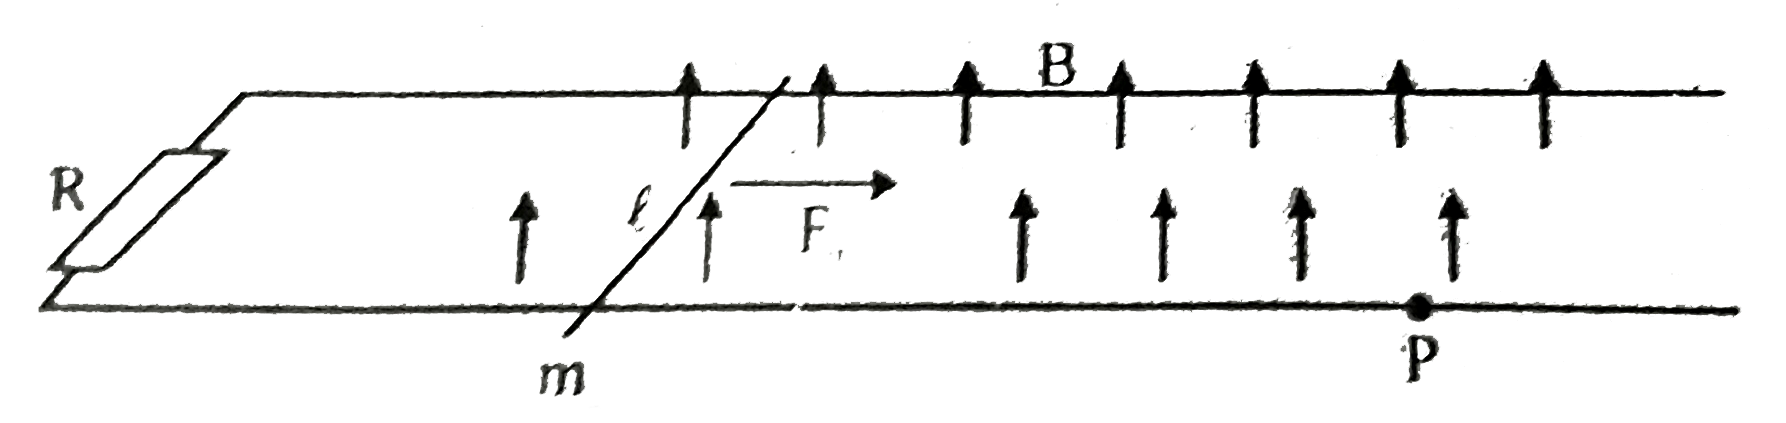 The long, horizontal pair of rails shown in the figure is connected using resistance R. The distance between the rails is l, the electrical resistance of the rails is negligible. A conducting wire of mass m and length l can slide without friction on the pair of rails, in a vertical, homogeneous magnetic field of induction B.    A force of magnitude F(0) is exerted for sufficiently long time onto the conducting wire, so that the speed of the wire becomes nearly constant. The force F(0) is now removed at a certain point P What distance (inm) does the conducting wire cover on rails from point P before stopping?  (Given F(0)=20N, m=1.6 gm, R= 0.01 Omega l=19 cm, B=0.1 T)